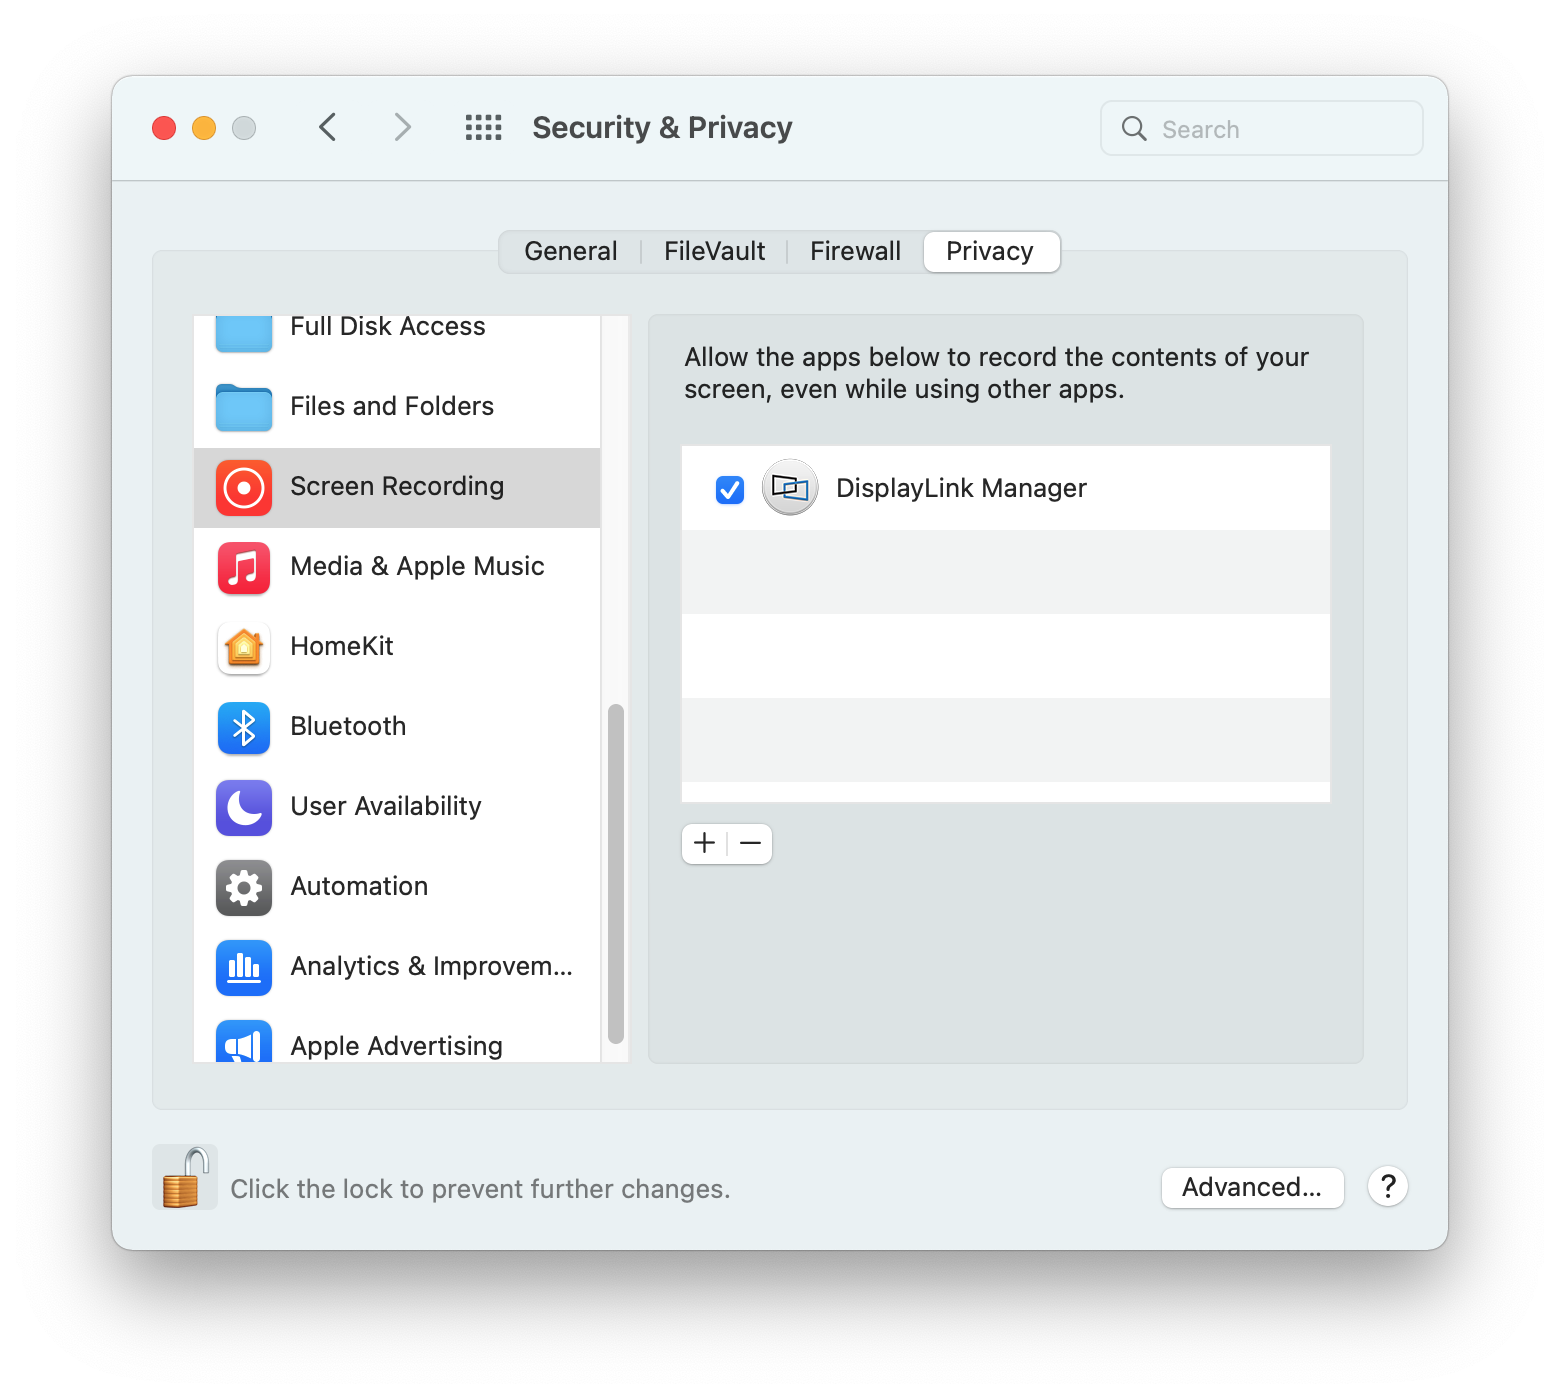 Security and Privacy Settings Screen Recording DisplayLink Check Mark